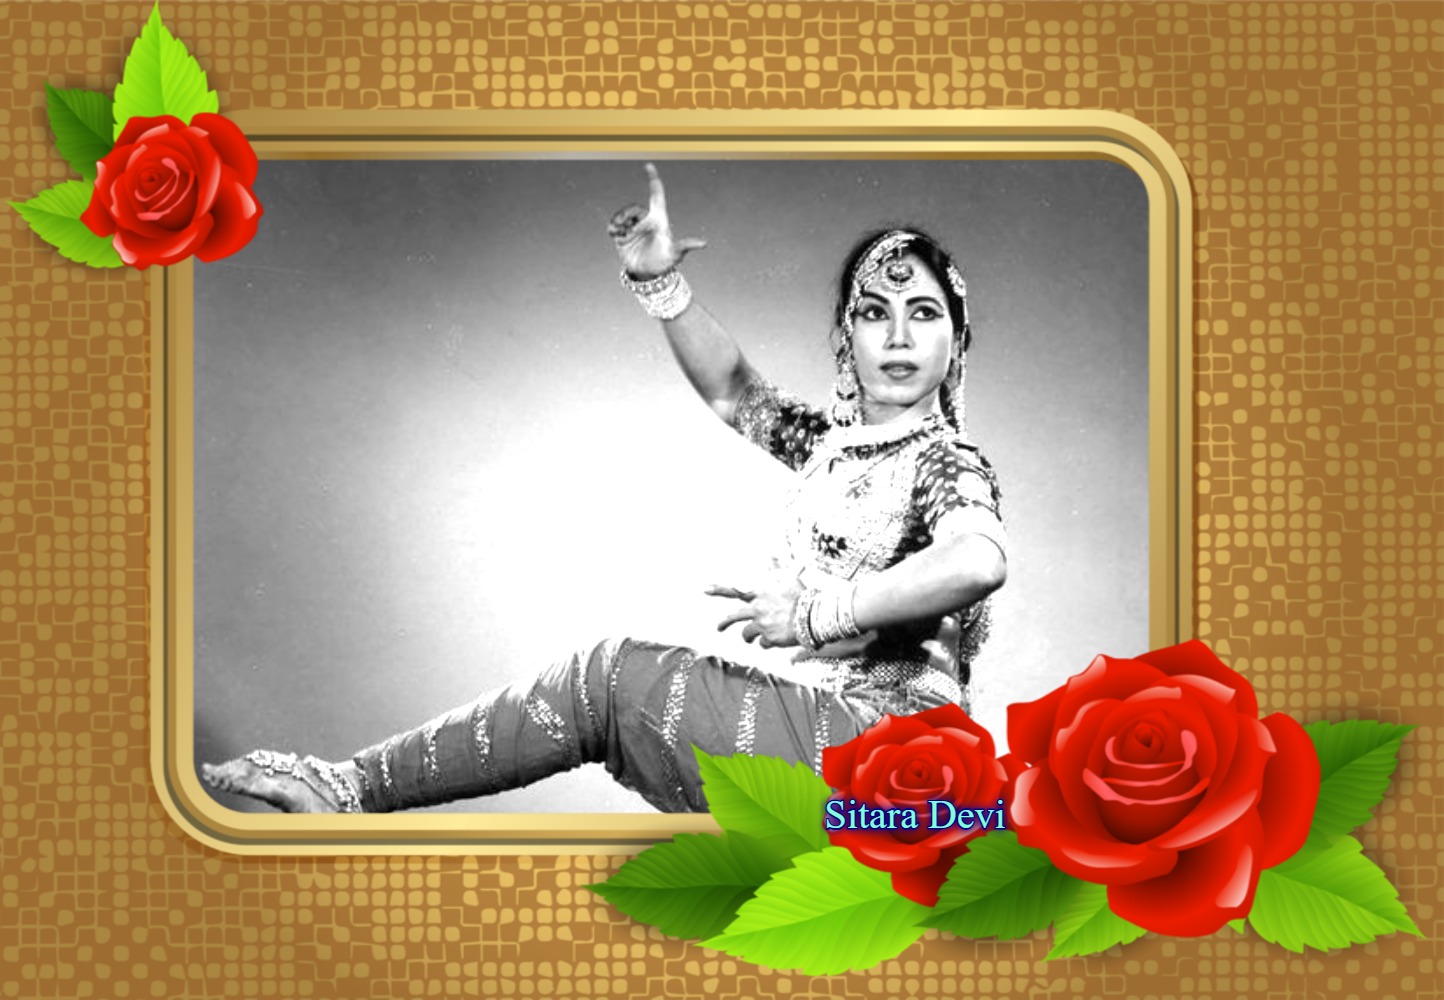 Read more about the article “Classical Dancing Legend Sitara Devi”